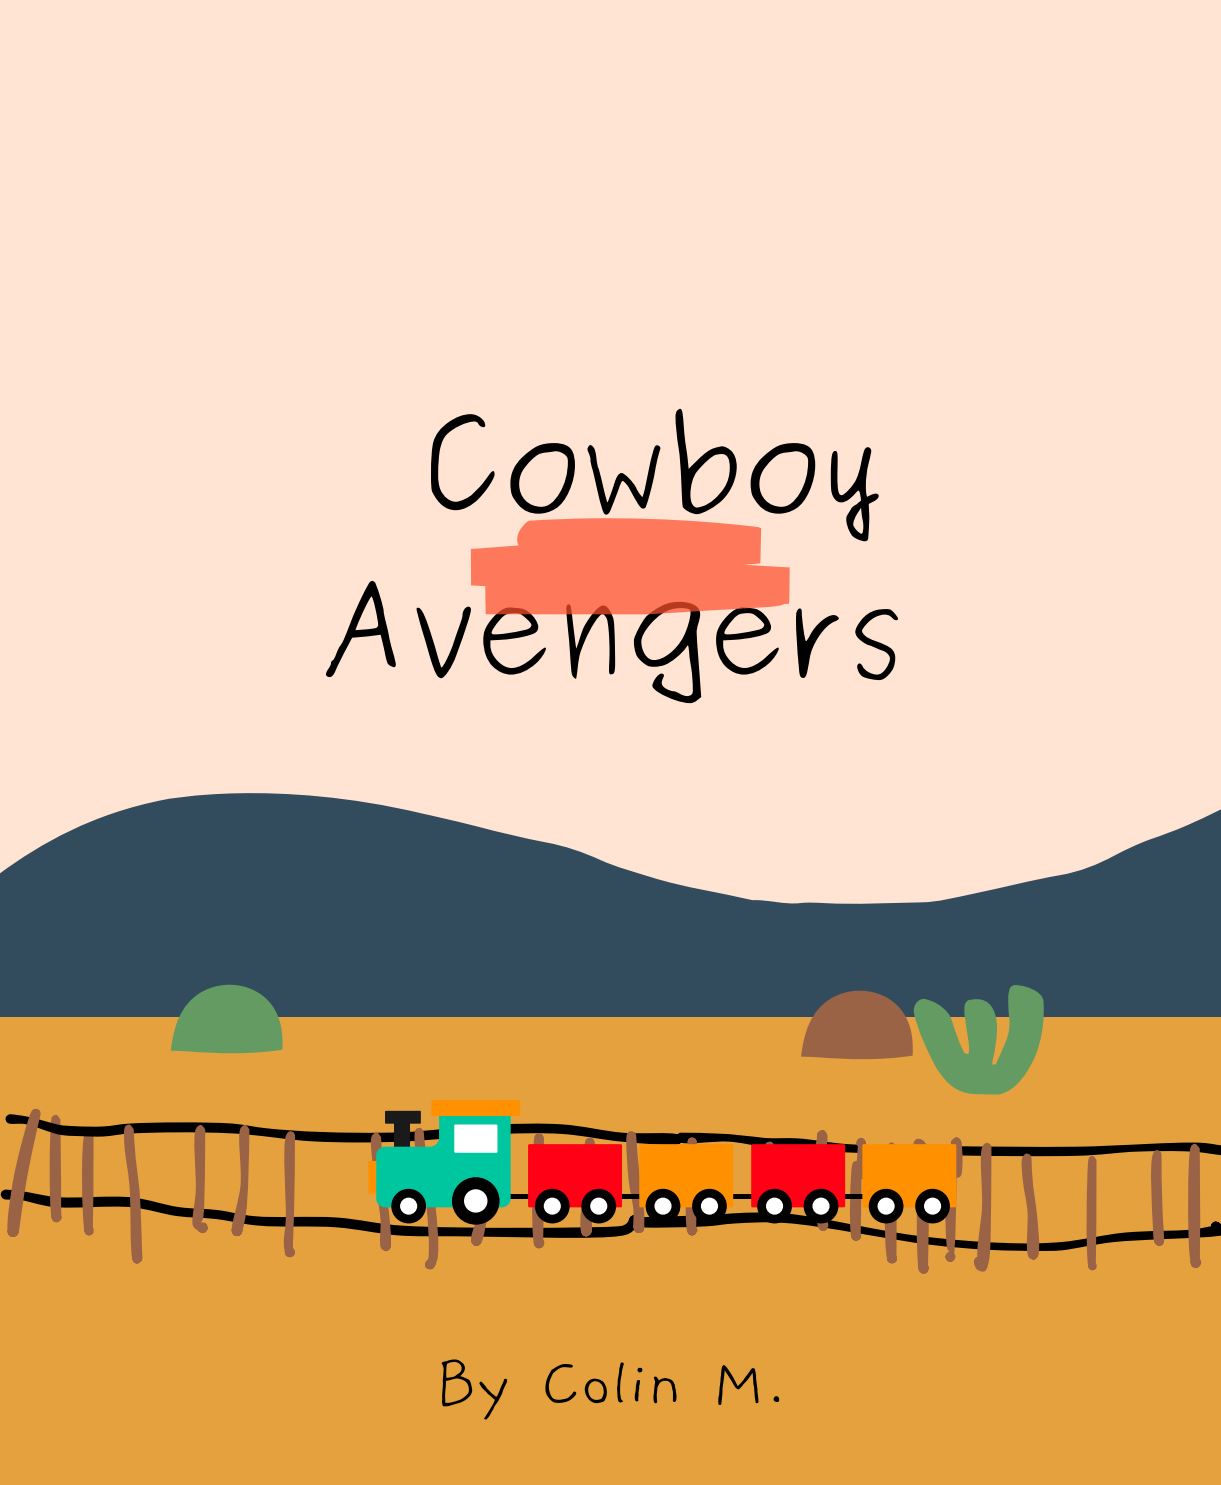 Cowboy Avengers by Colin M.